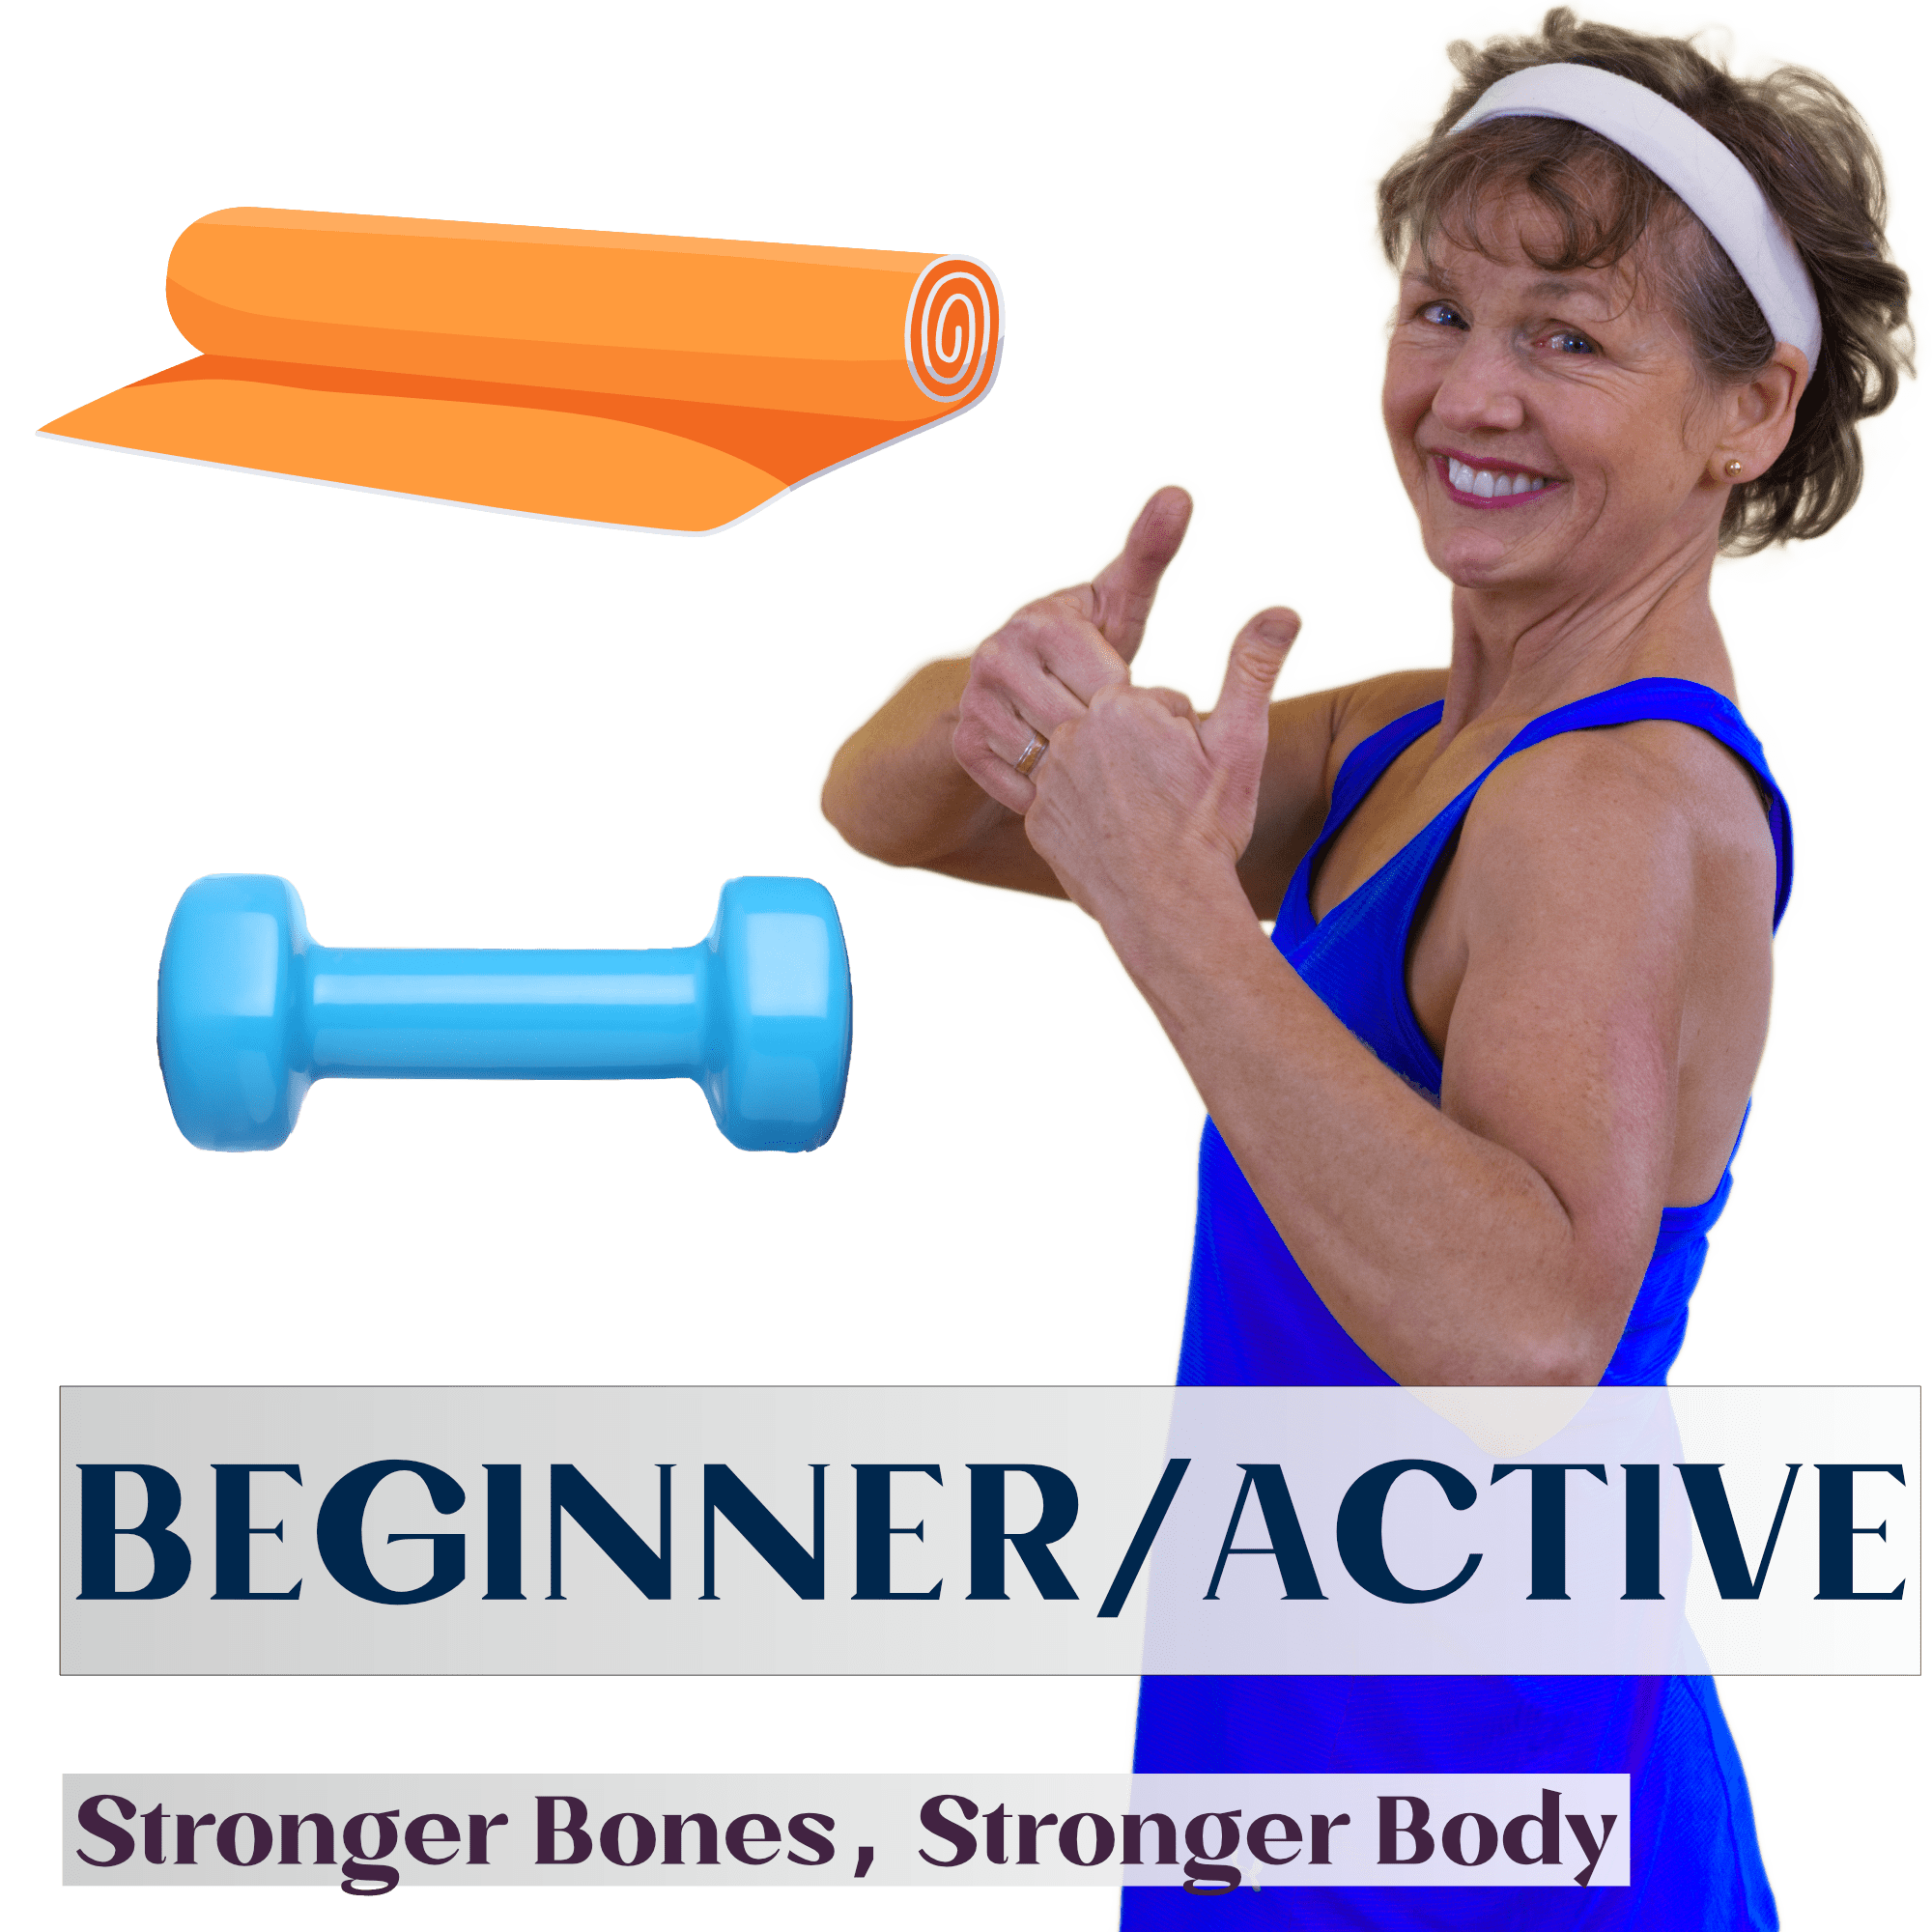 osteoporosis exercise equipment for beginner active video